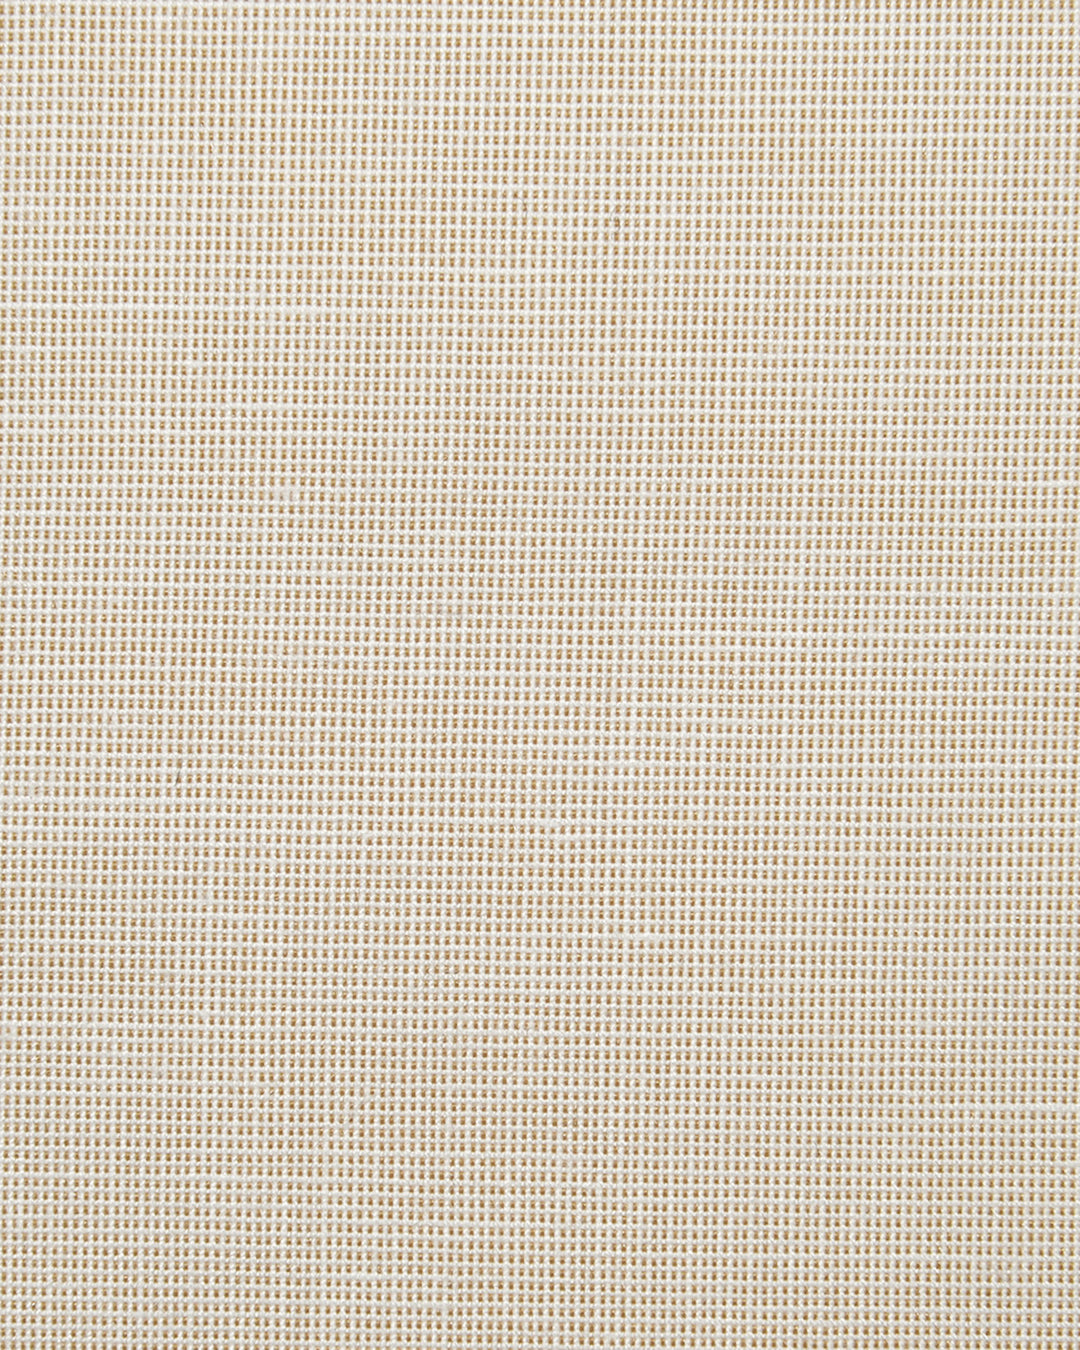 Cotton Poly: Light Beige End On End